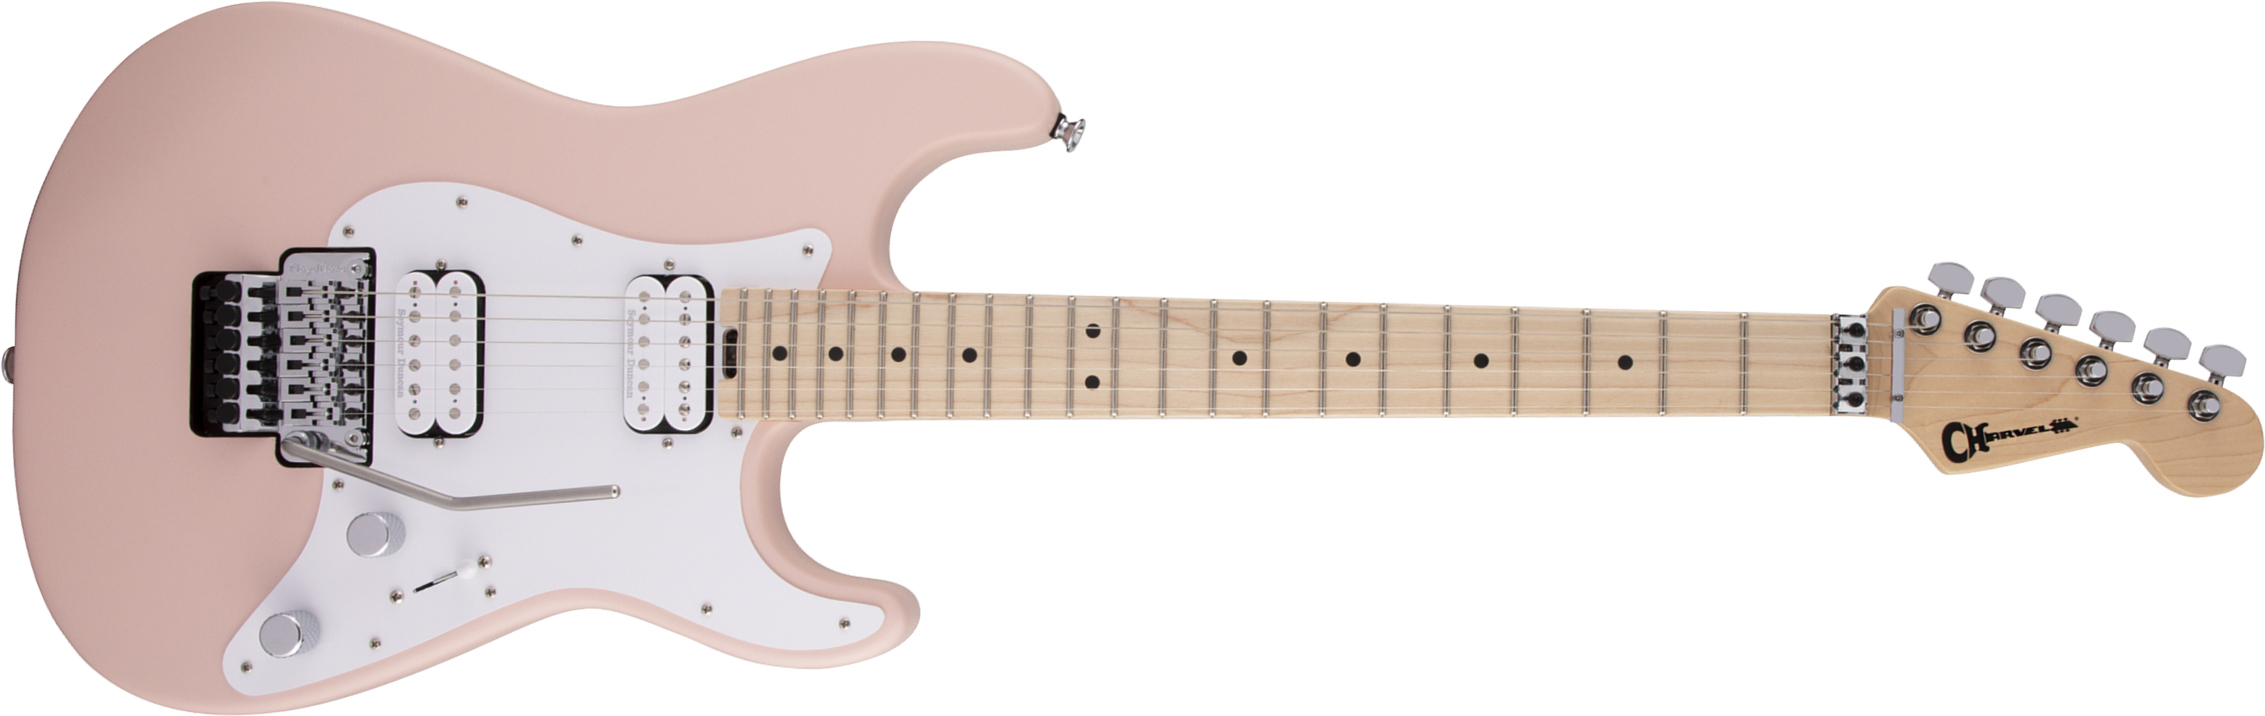 Charvel So-cal Style 1 Hh  Fr M Pro-mod 2h Seymour Duncan Mn - Satin Shell Pink - E-Gitarre in Str-Form - Main picture